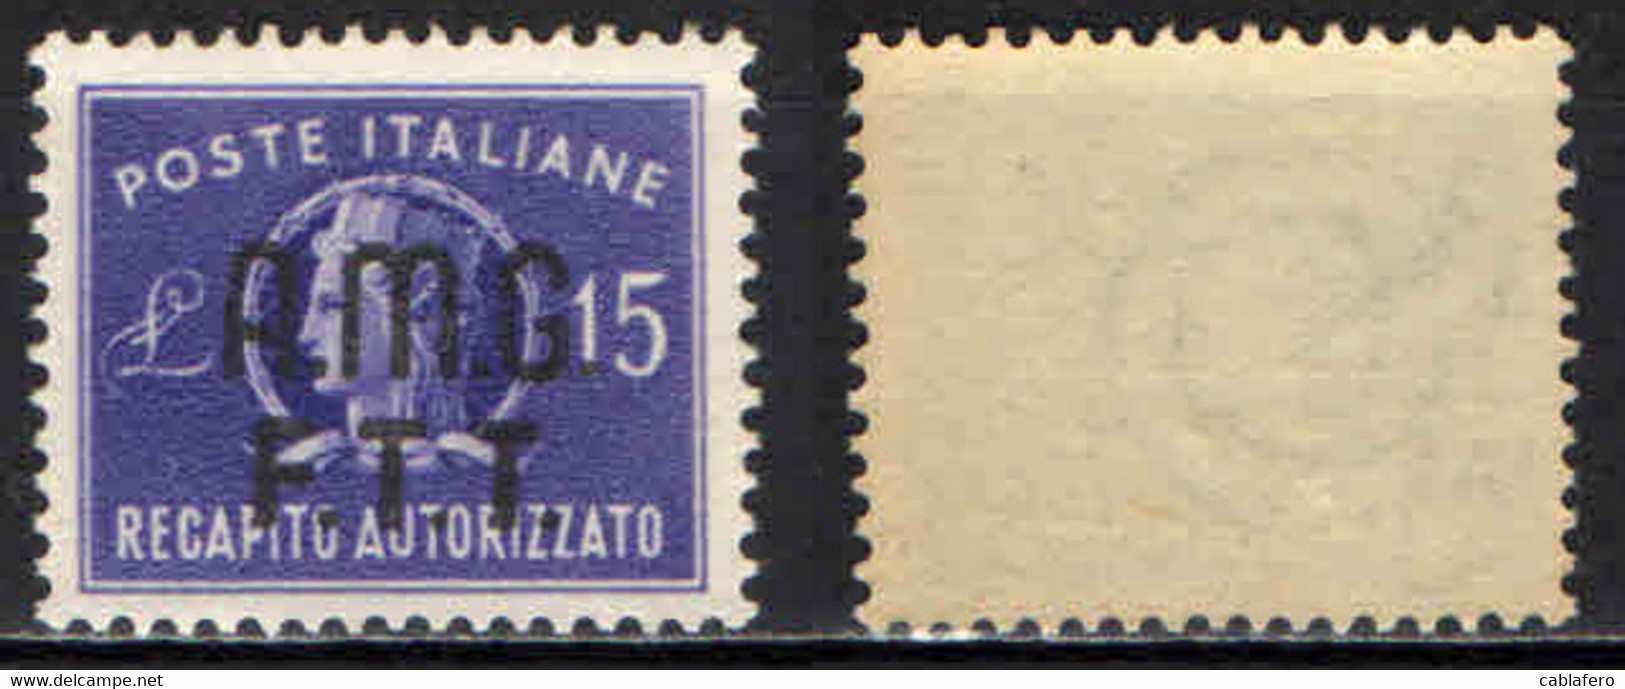 TRIESTE - AMGFTT - 1949 - 15 LIRE SOVRASTAMPA SU DUE RIGHE - MNH - Fiscales